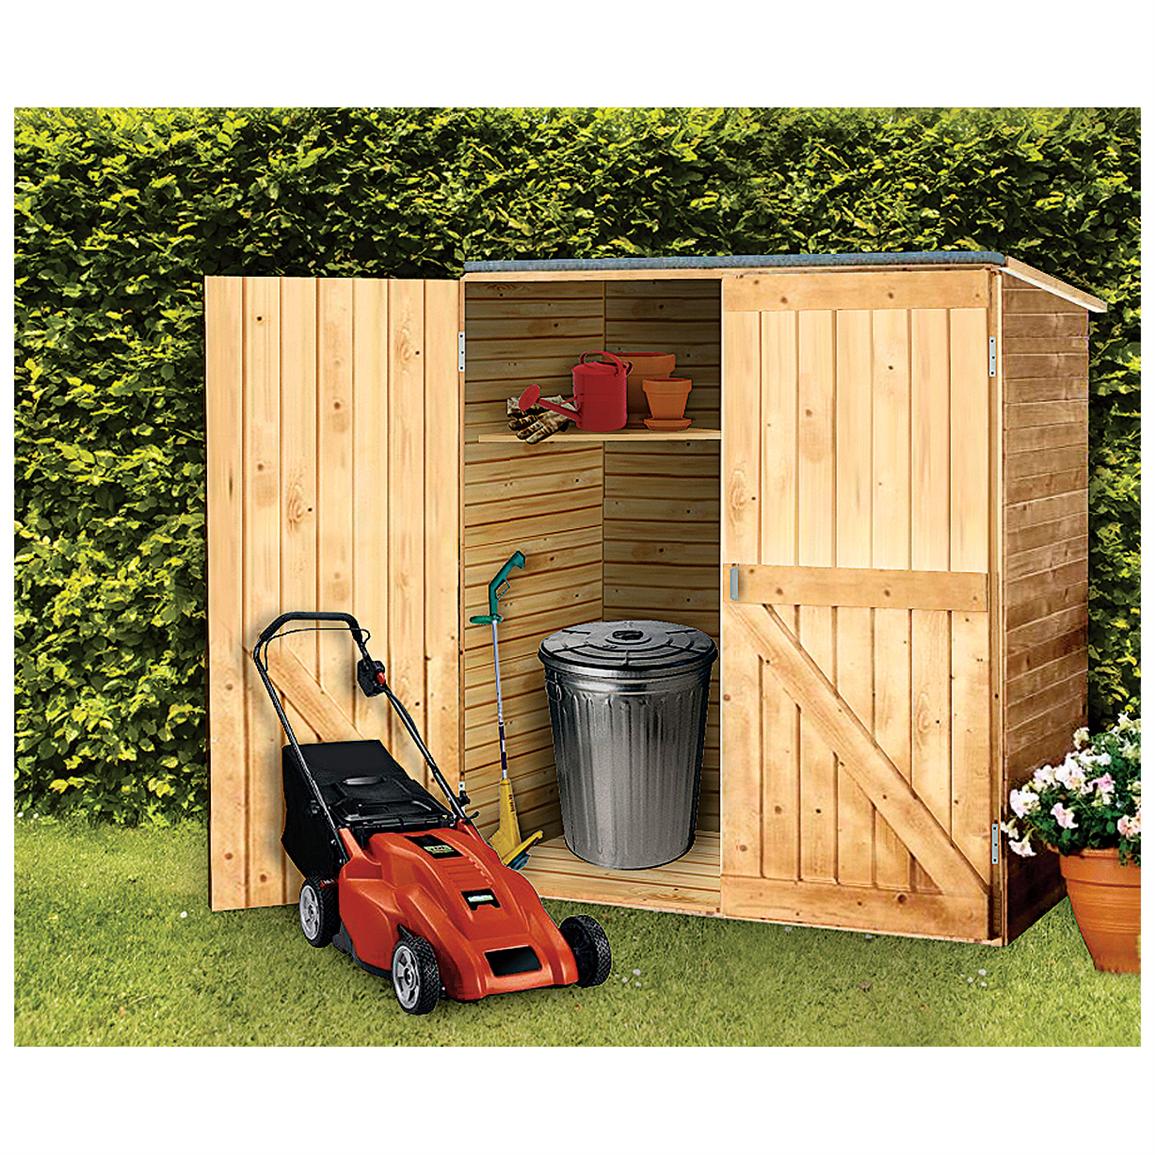 solid wood outdoor storage shed - 236390, patio storage at